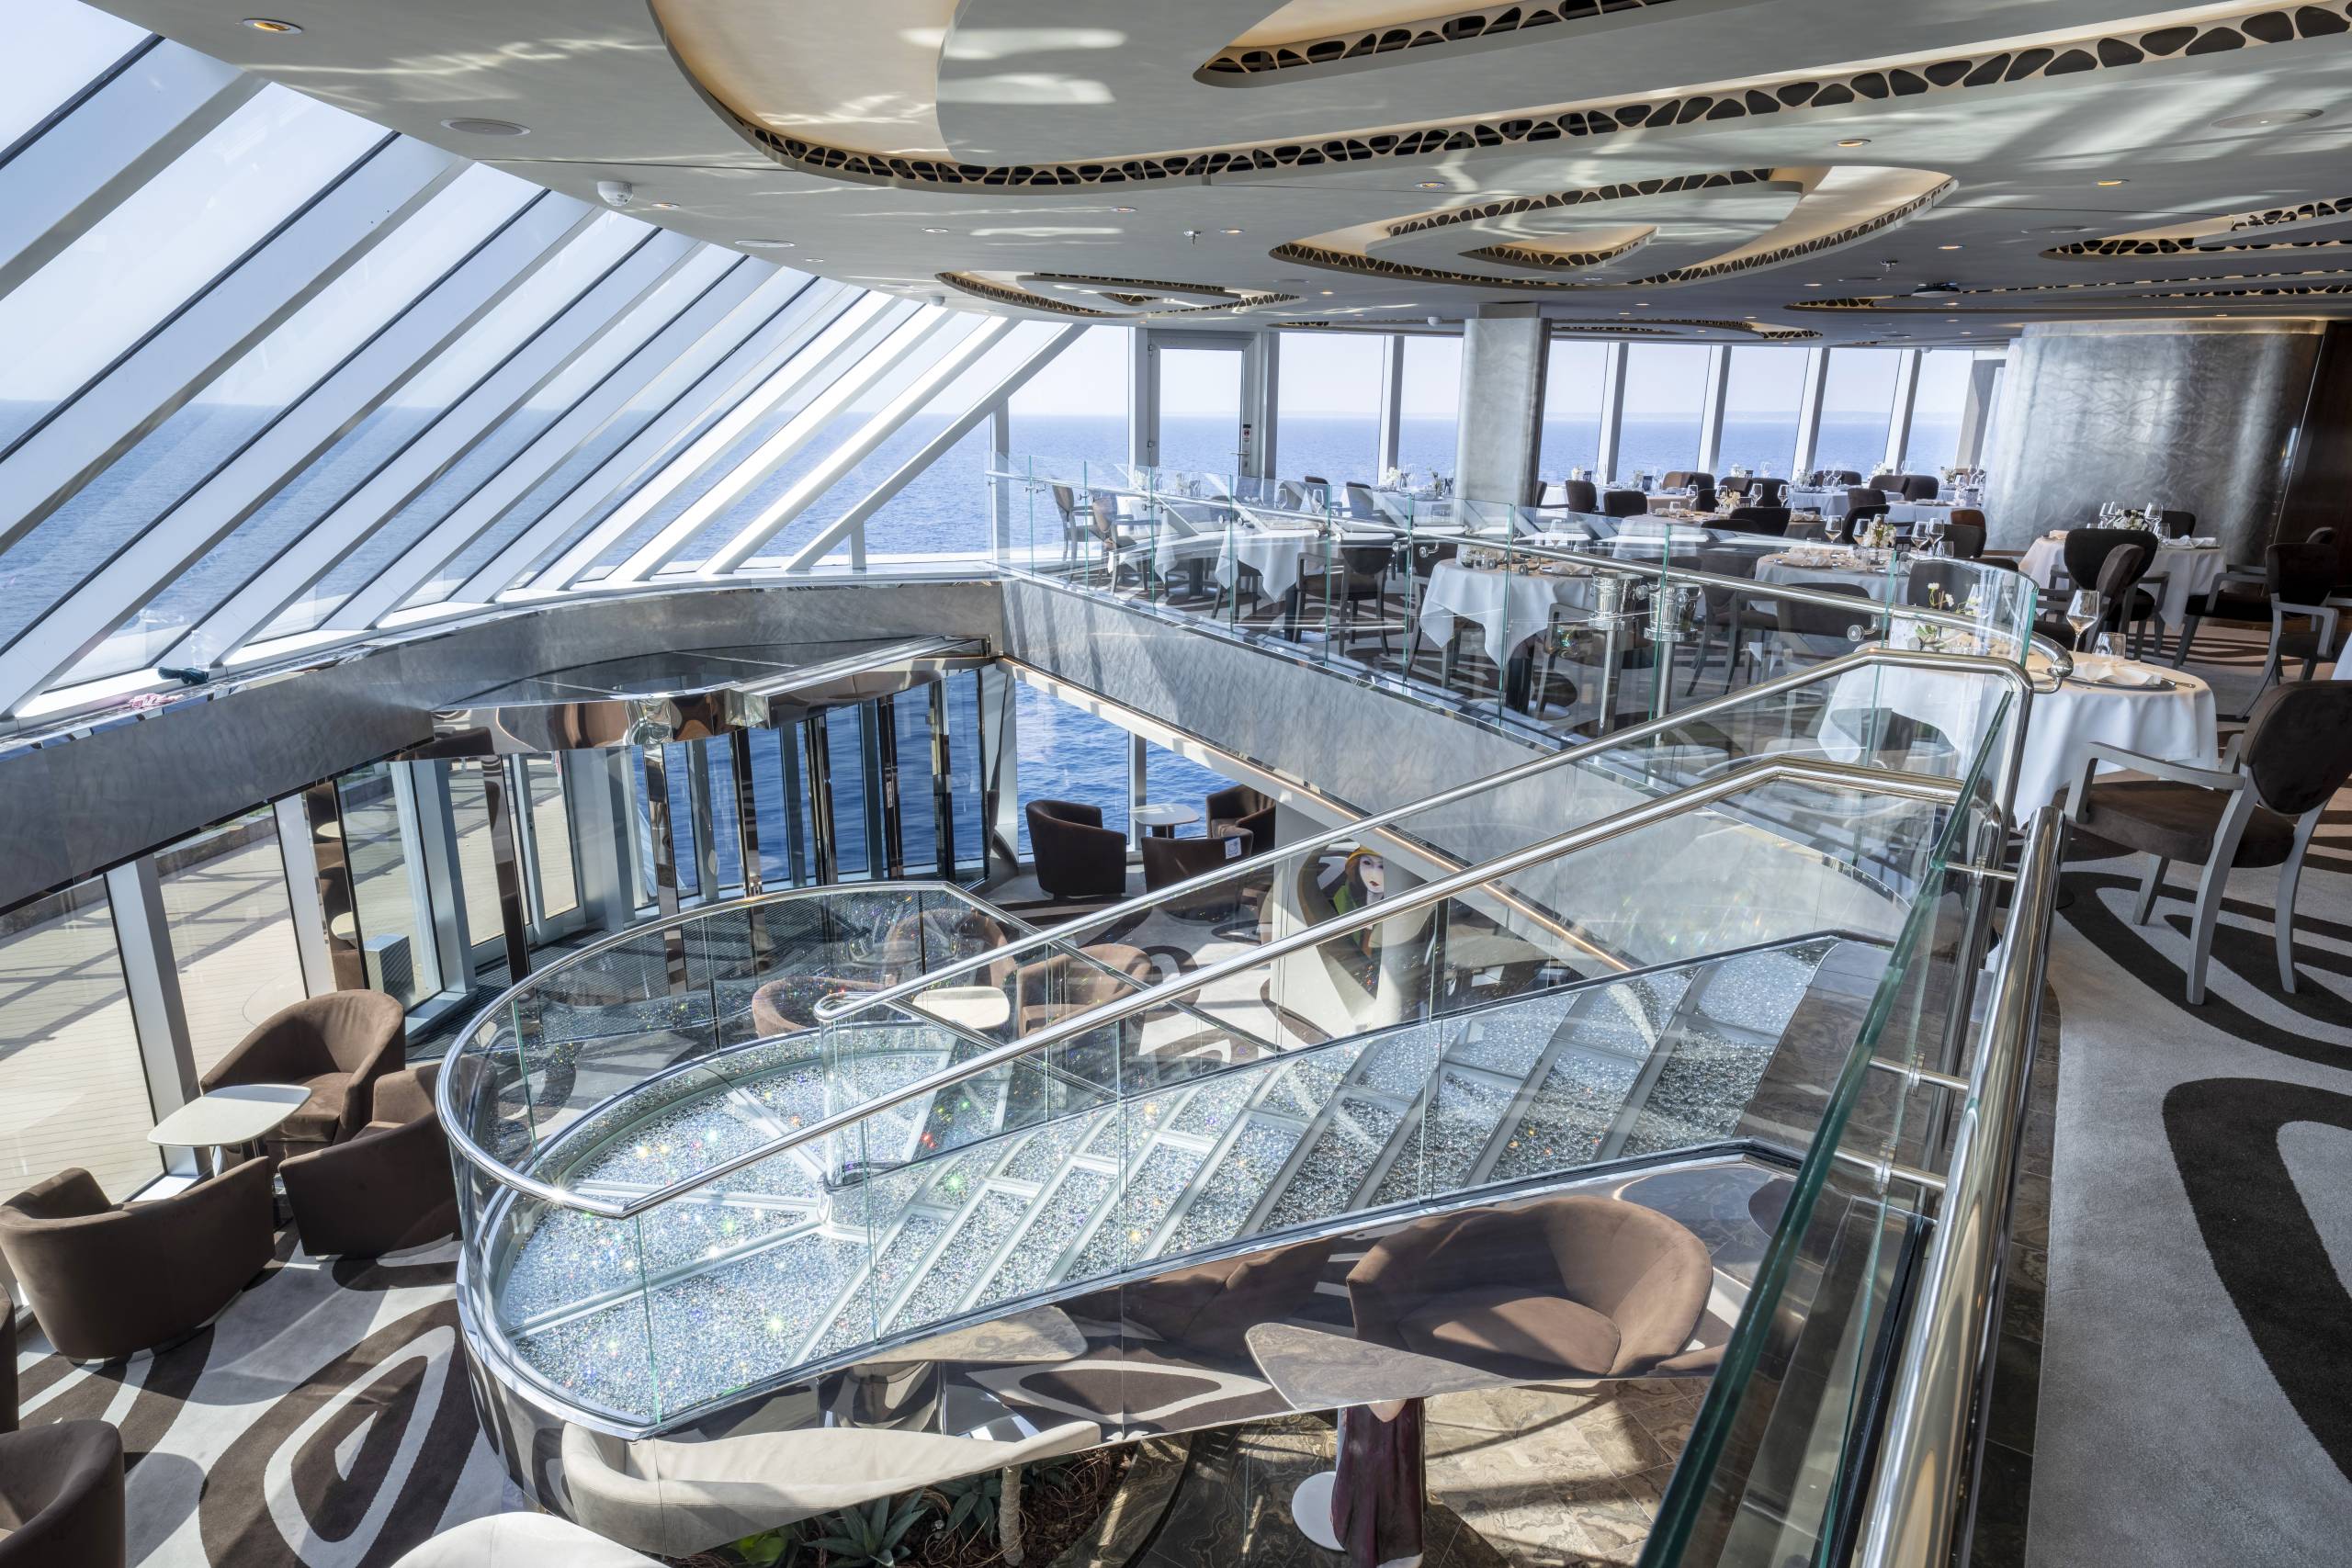 Top Sail Lounge and Restaurant at the MSC Yacht Club.